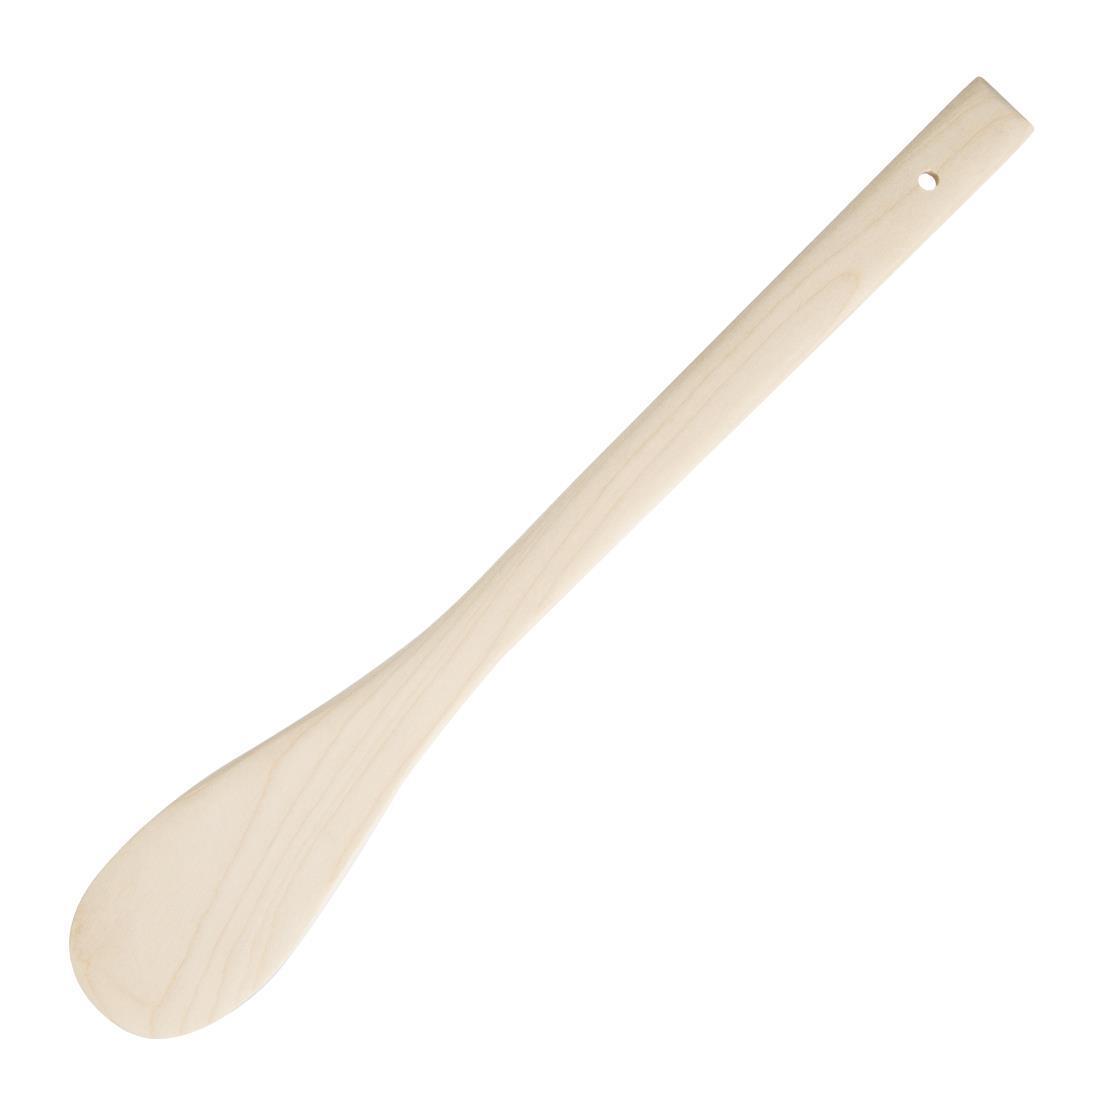 Vogue Round Ended Wooden Spatula 12" - J113  - 1